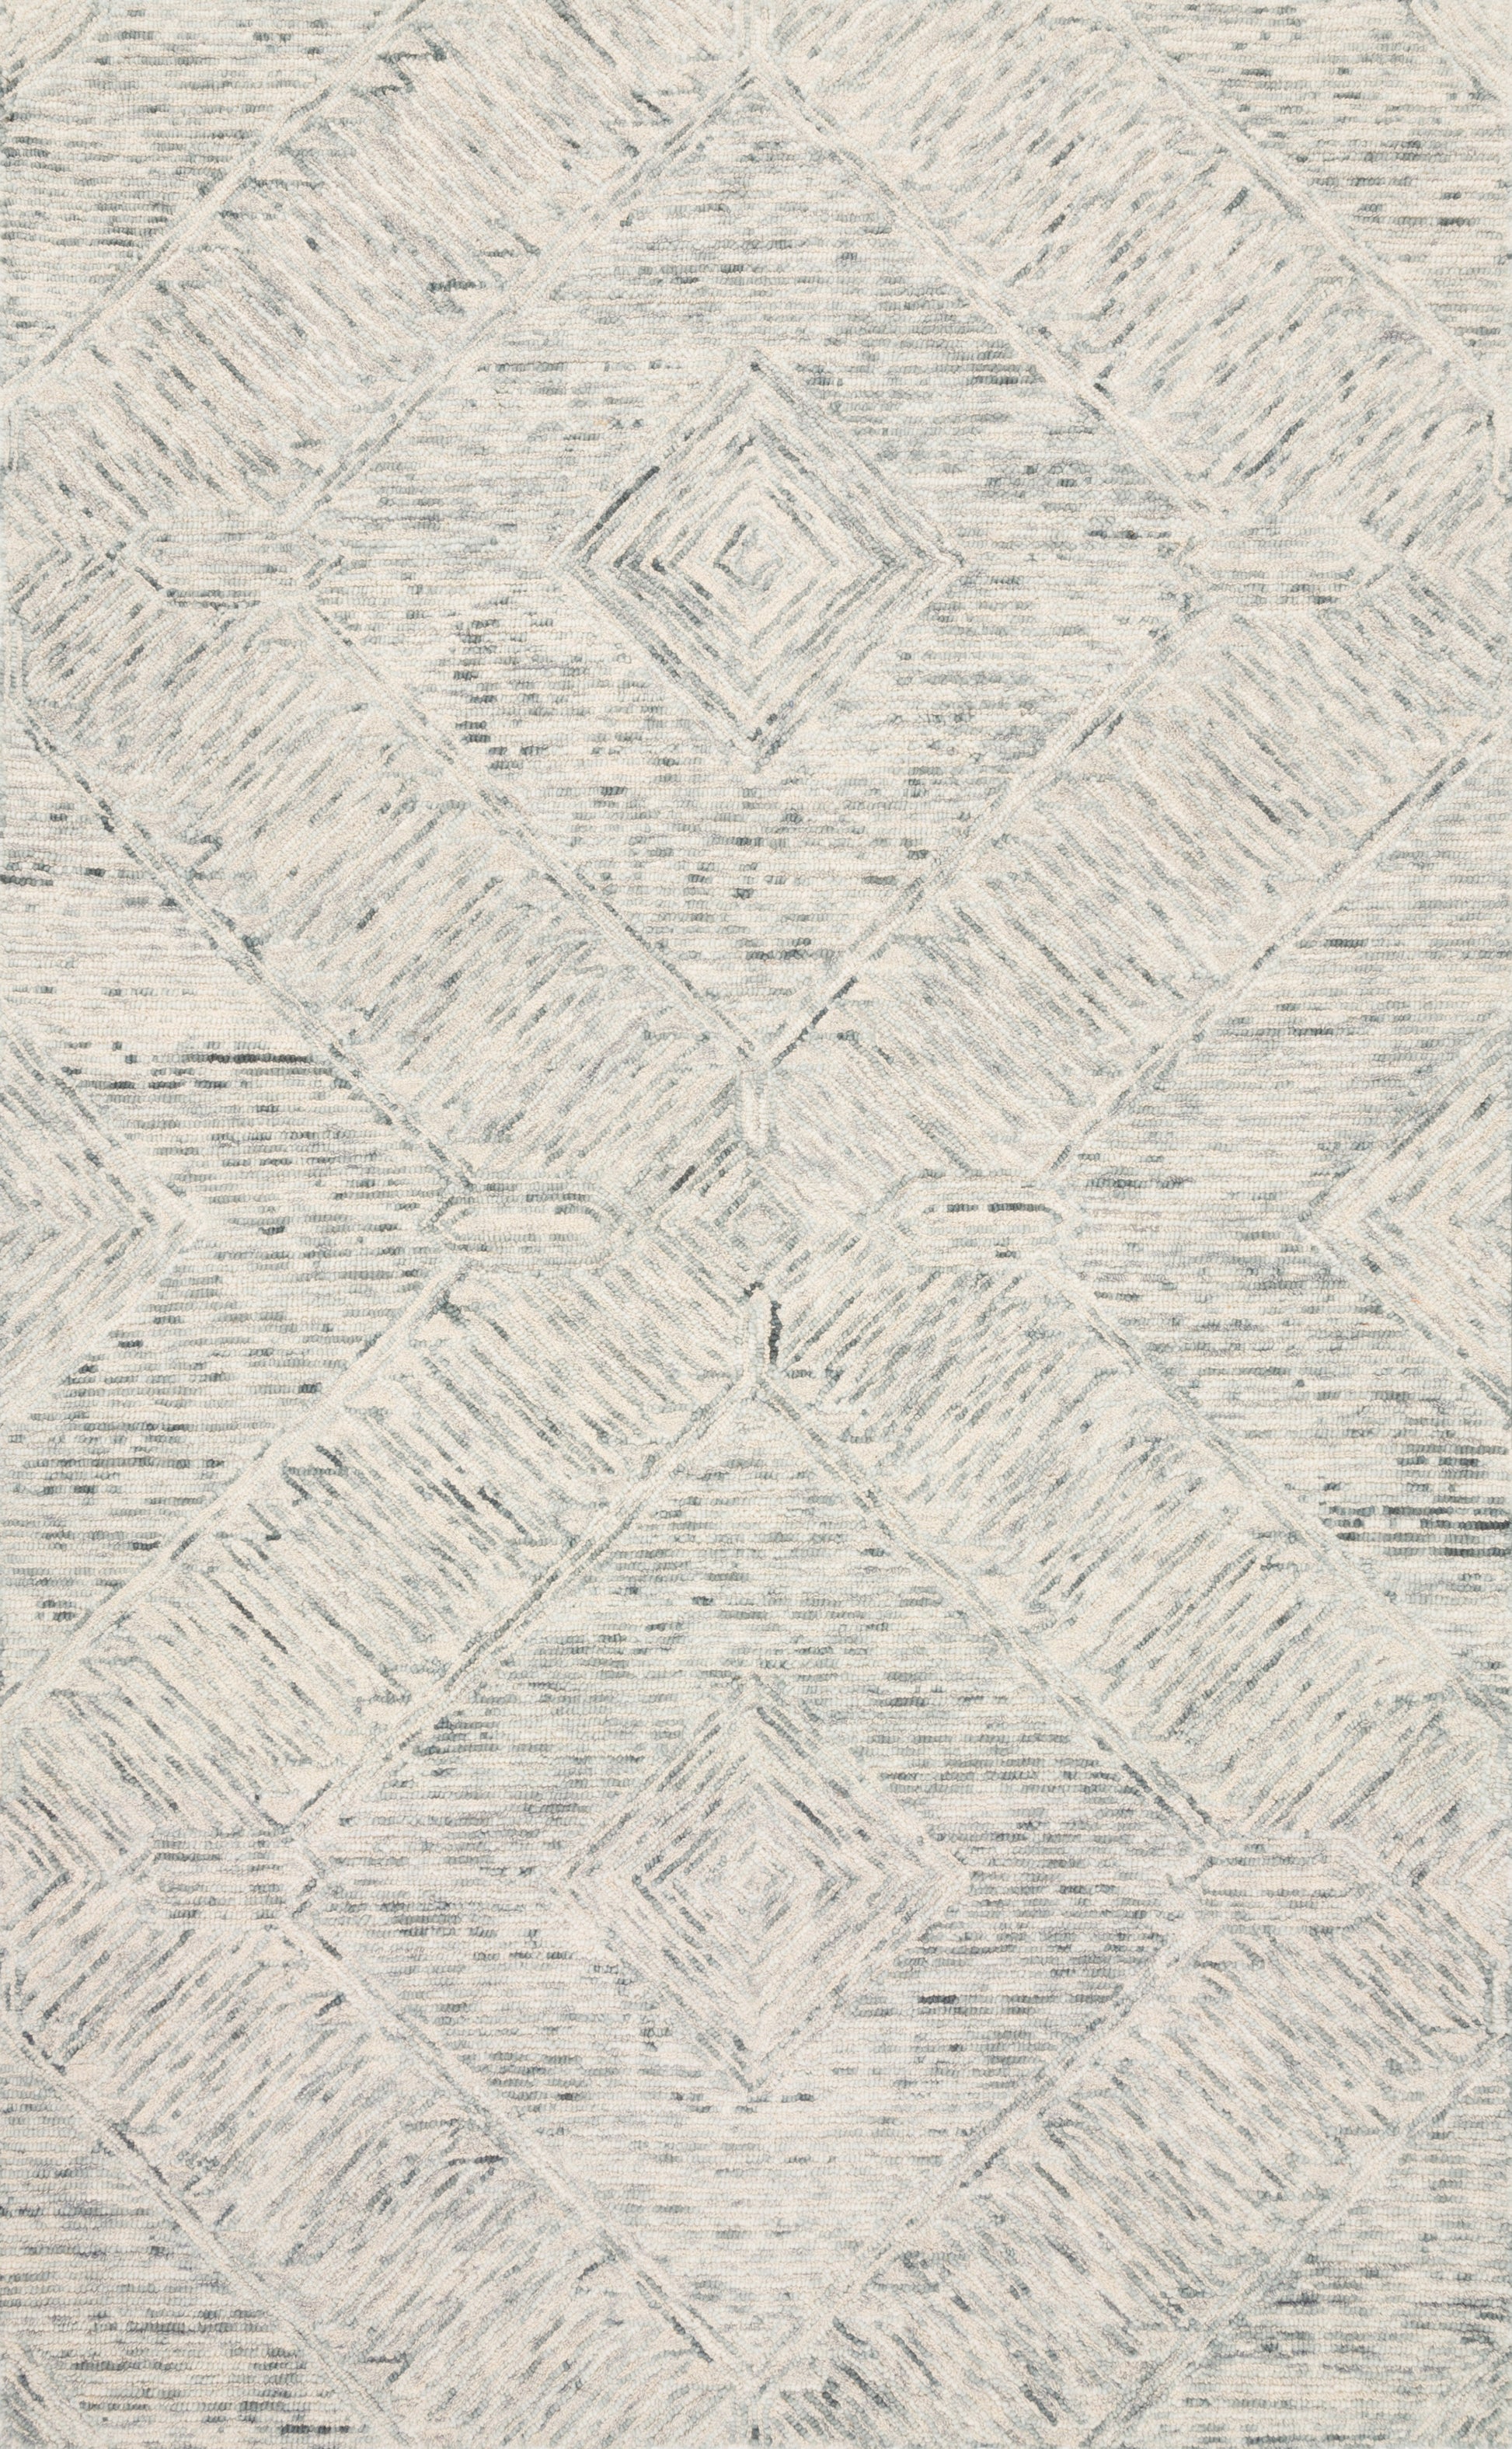 A picture of Loloi's Ziva rug, in style ZV-05, color Sky